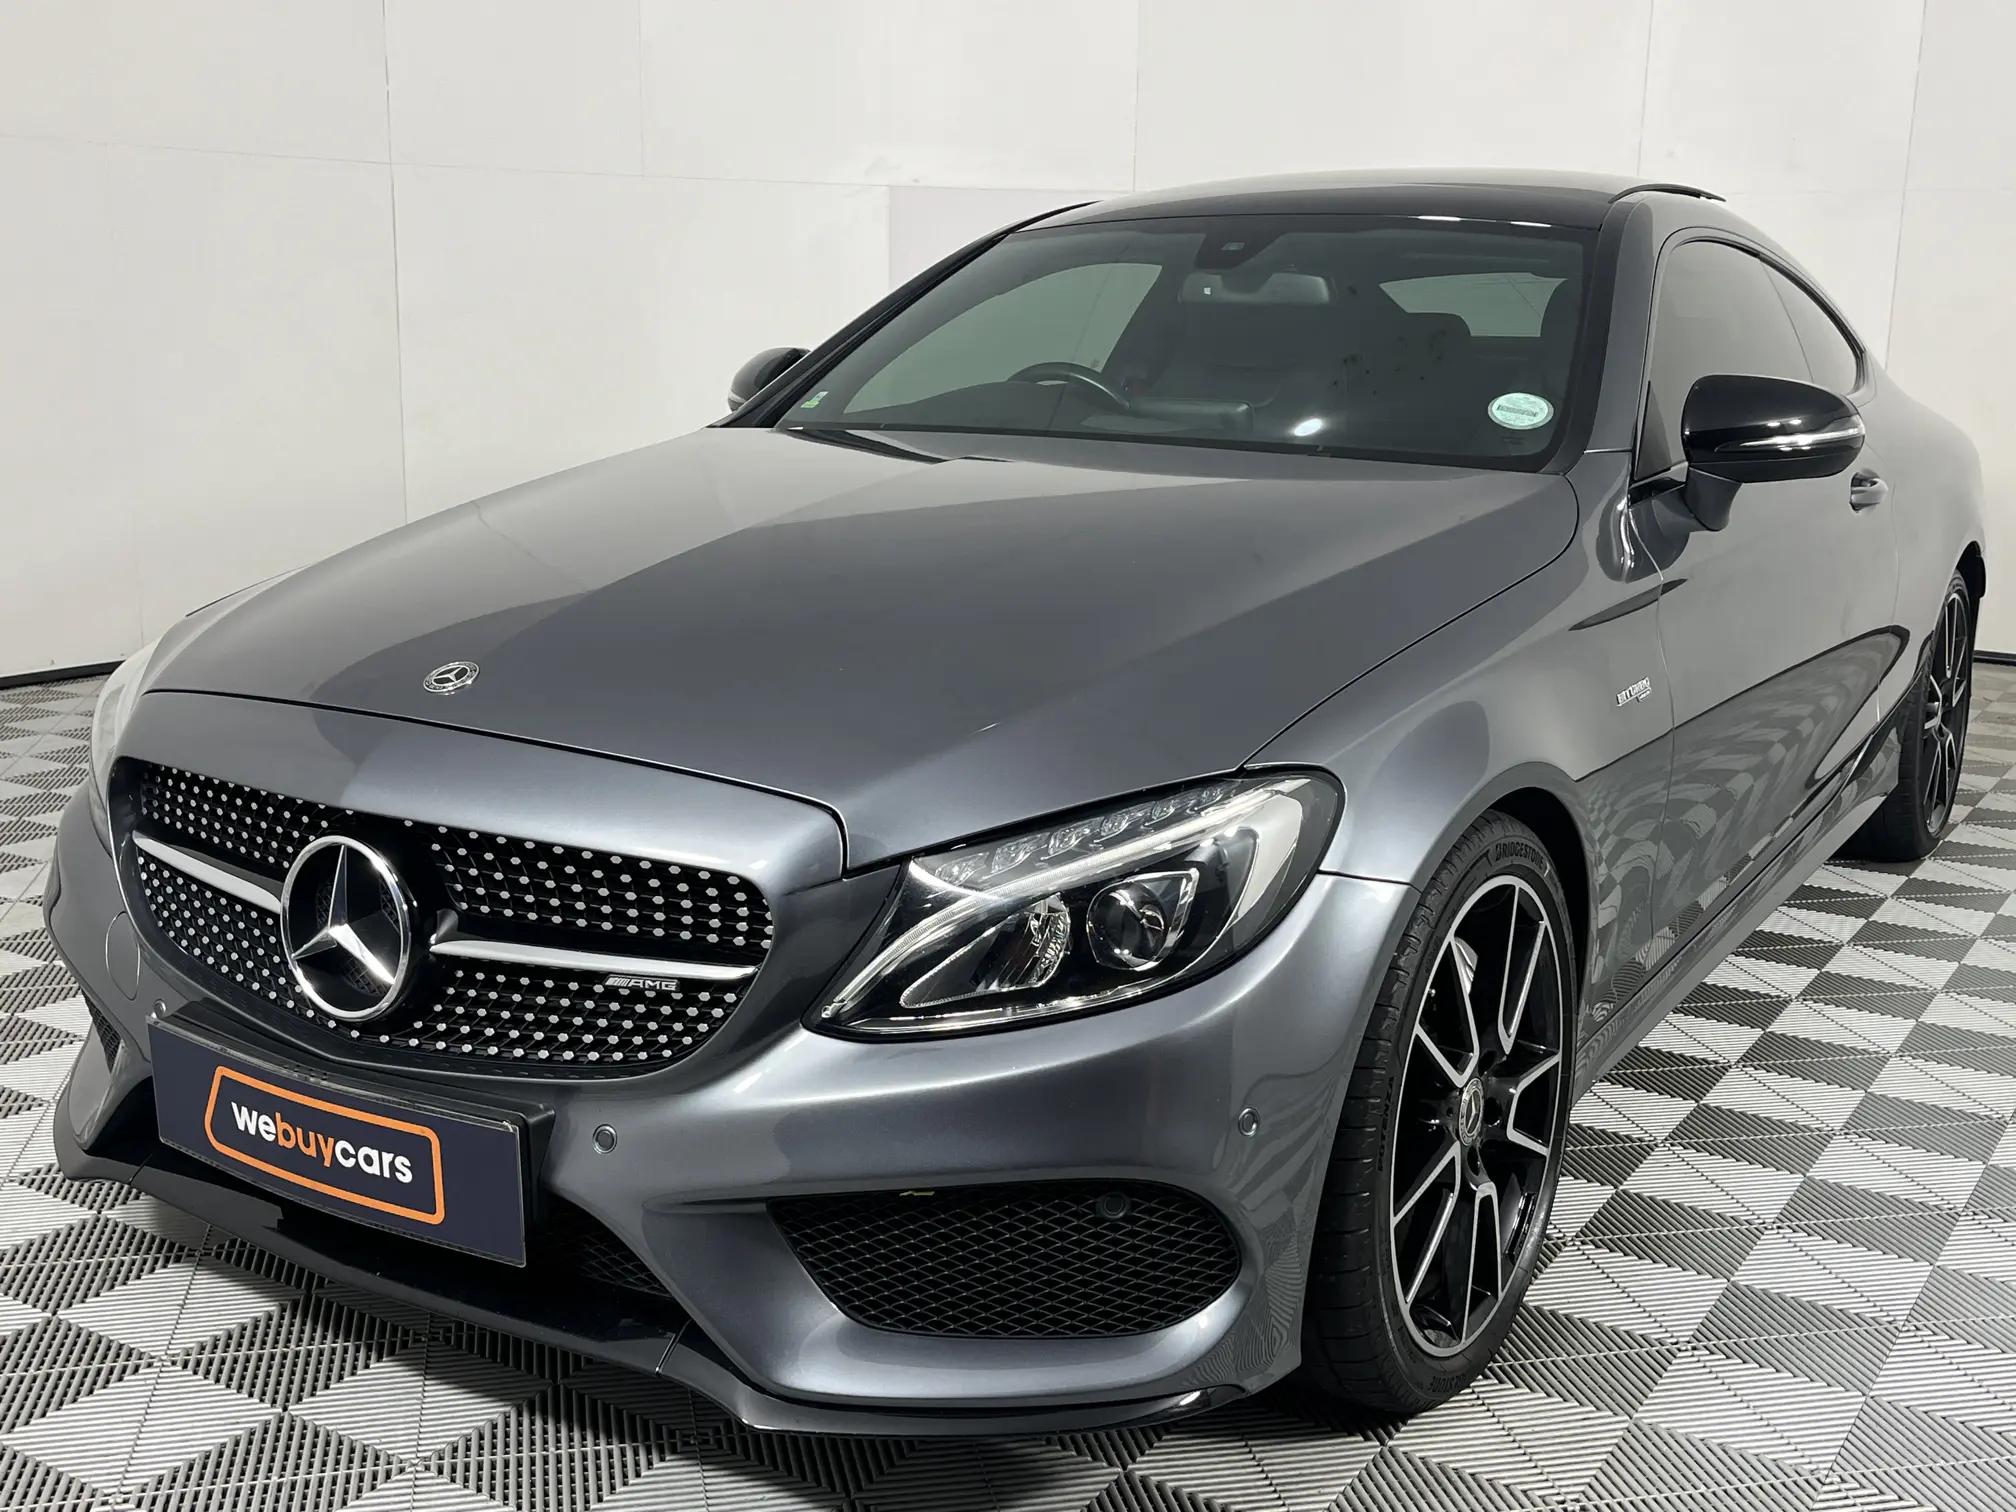 Mercedes Benz C 43 AMG 4Matic Coupe